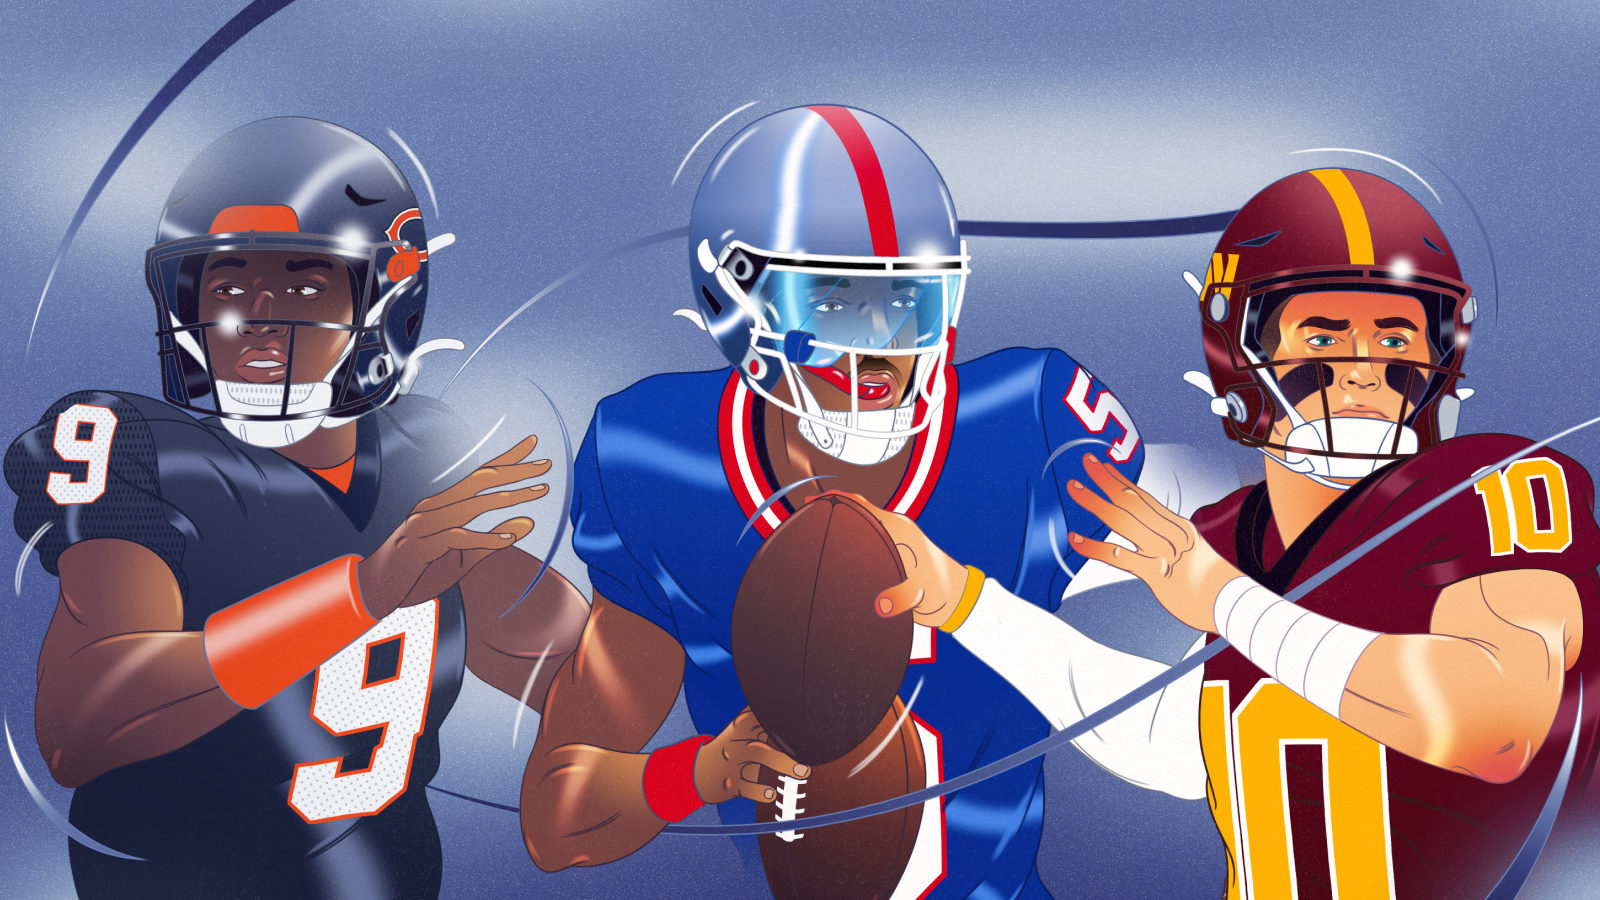 Seven teams  six QBs and your chance to make the perfect NFL draft match  Play GM now